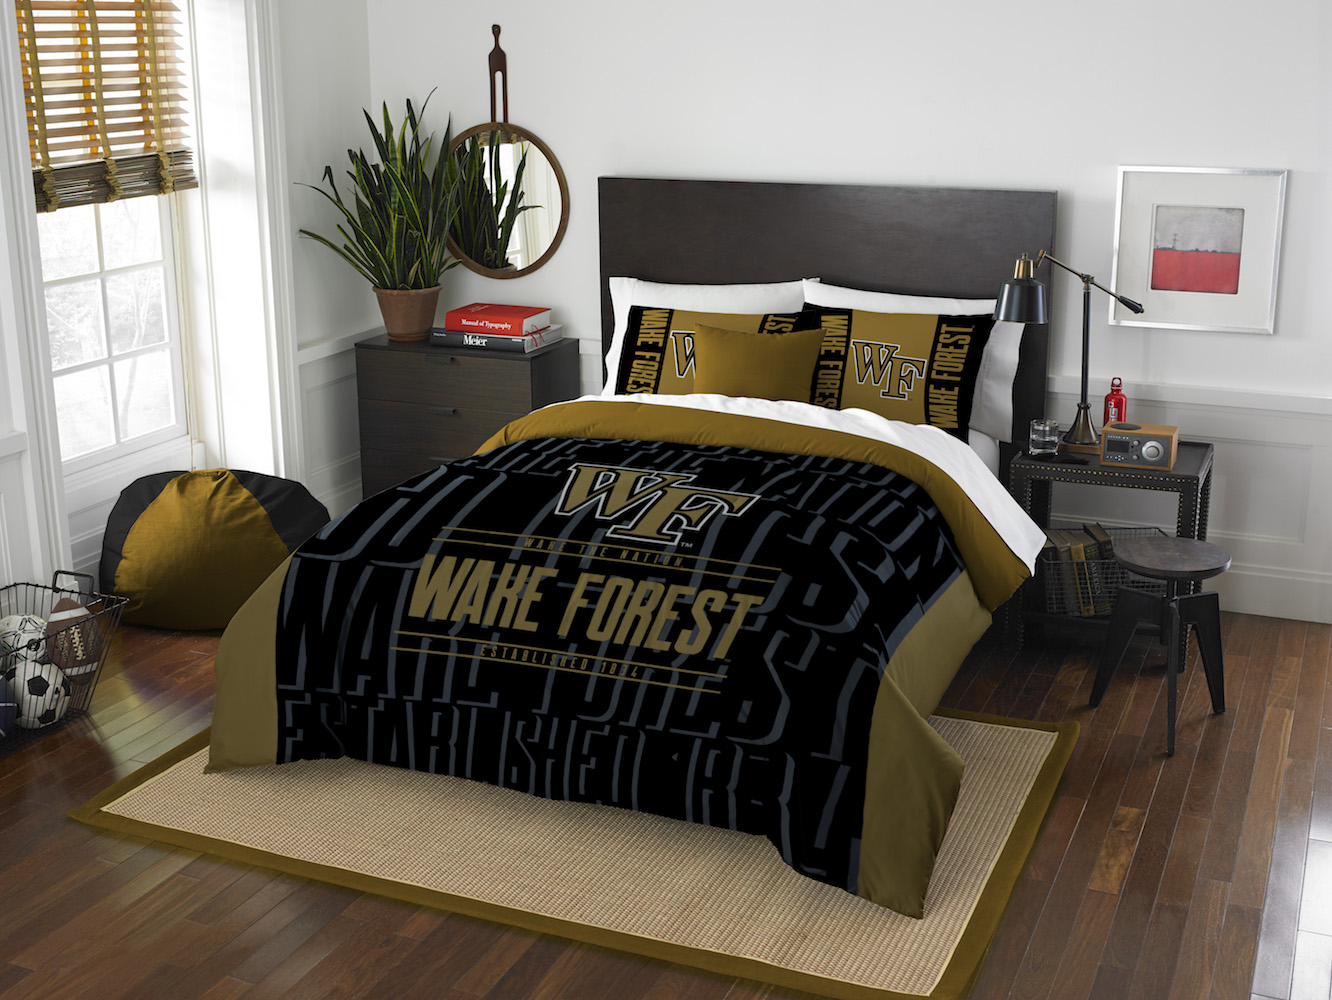 Wake Forest Demon Deacons QUEEN/FULL size Comforter and 2 Shams